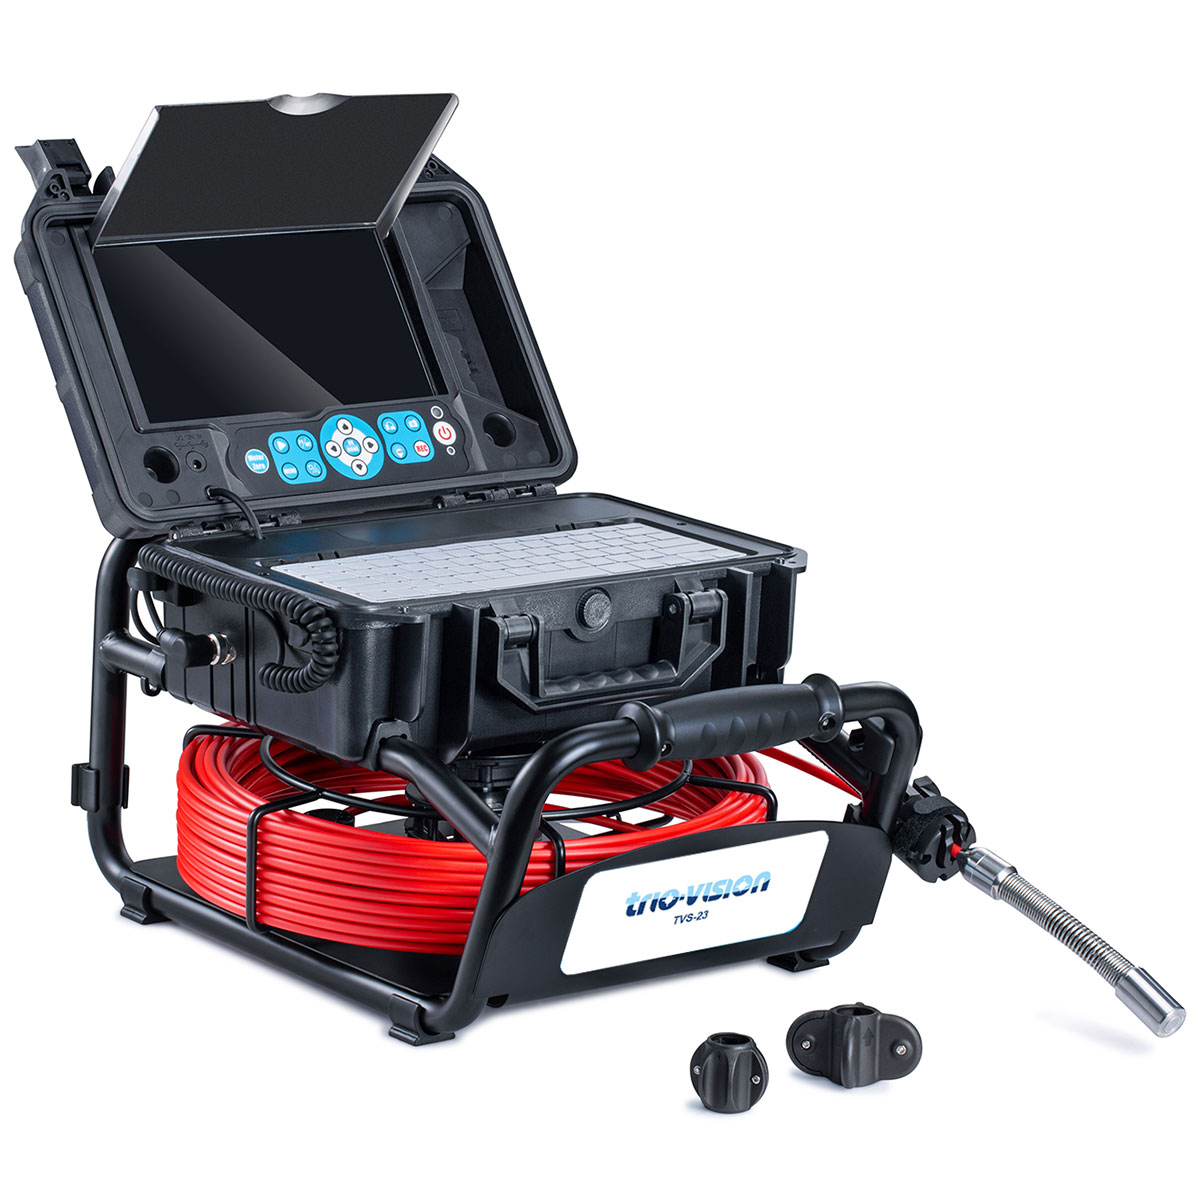 Pipe Inspection Camera AHD 23 mm Self-Levelling With 512Hz Transmitter